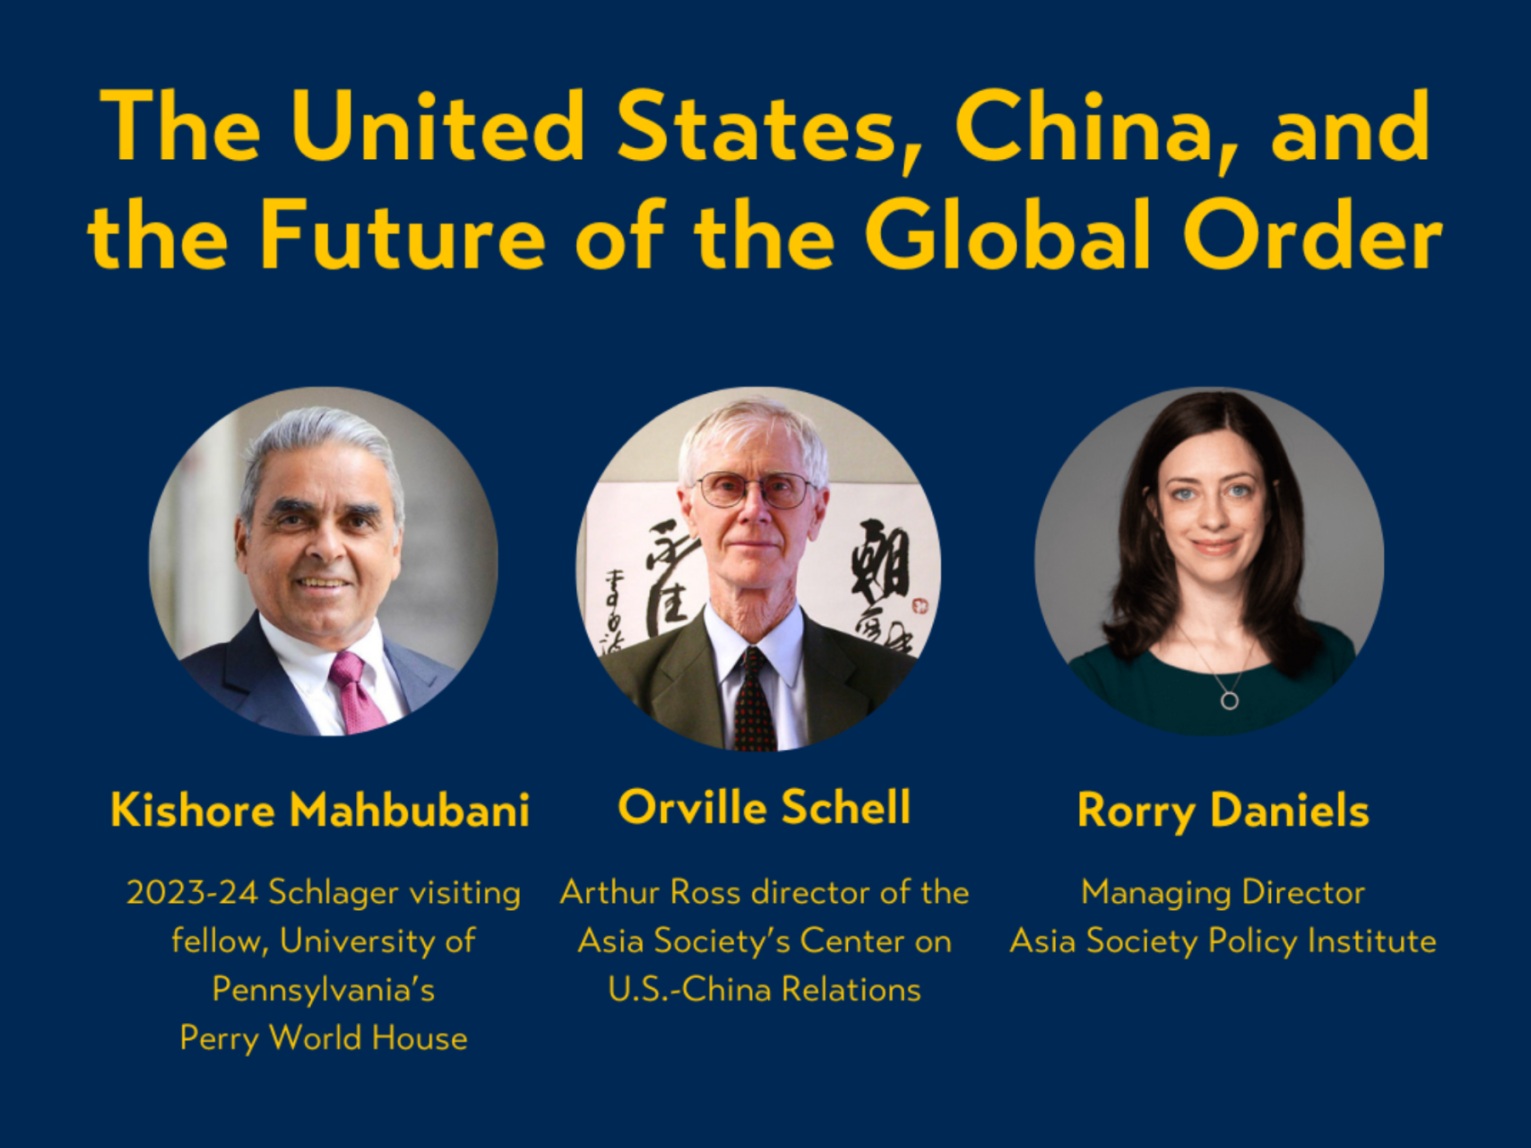  The United States, China, and the Future of the Global Order